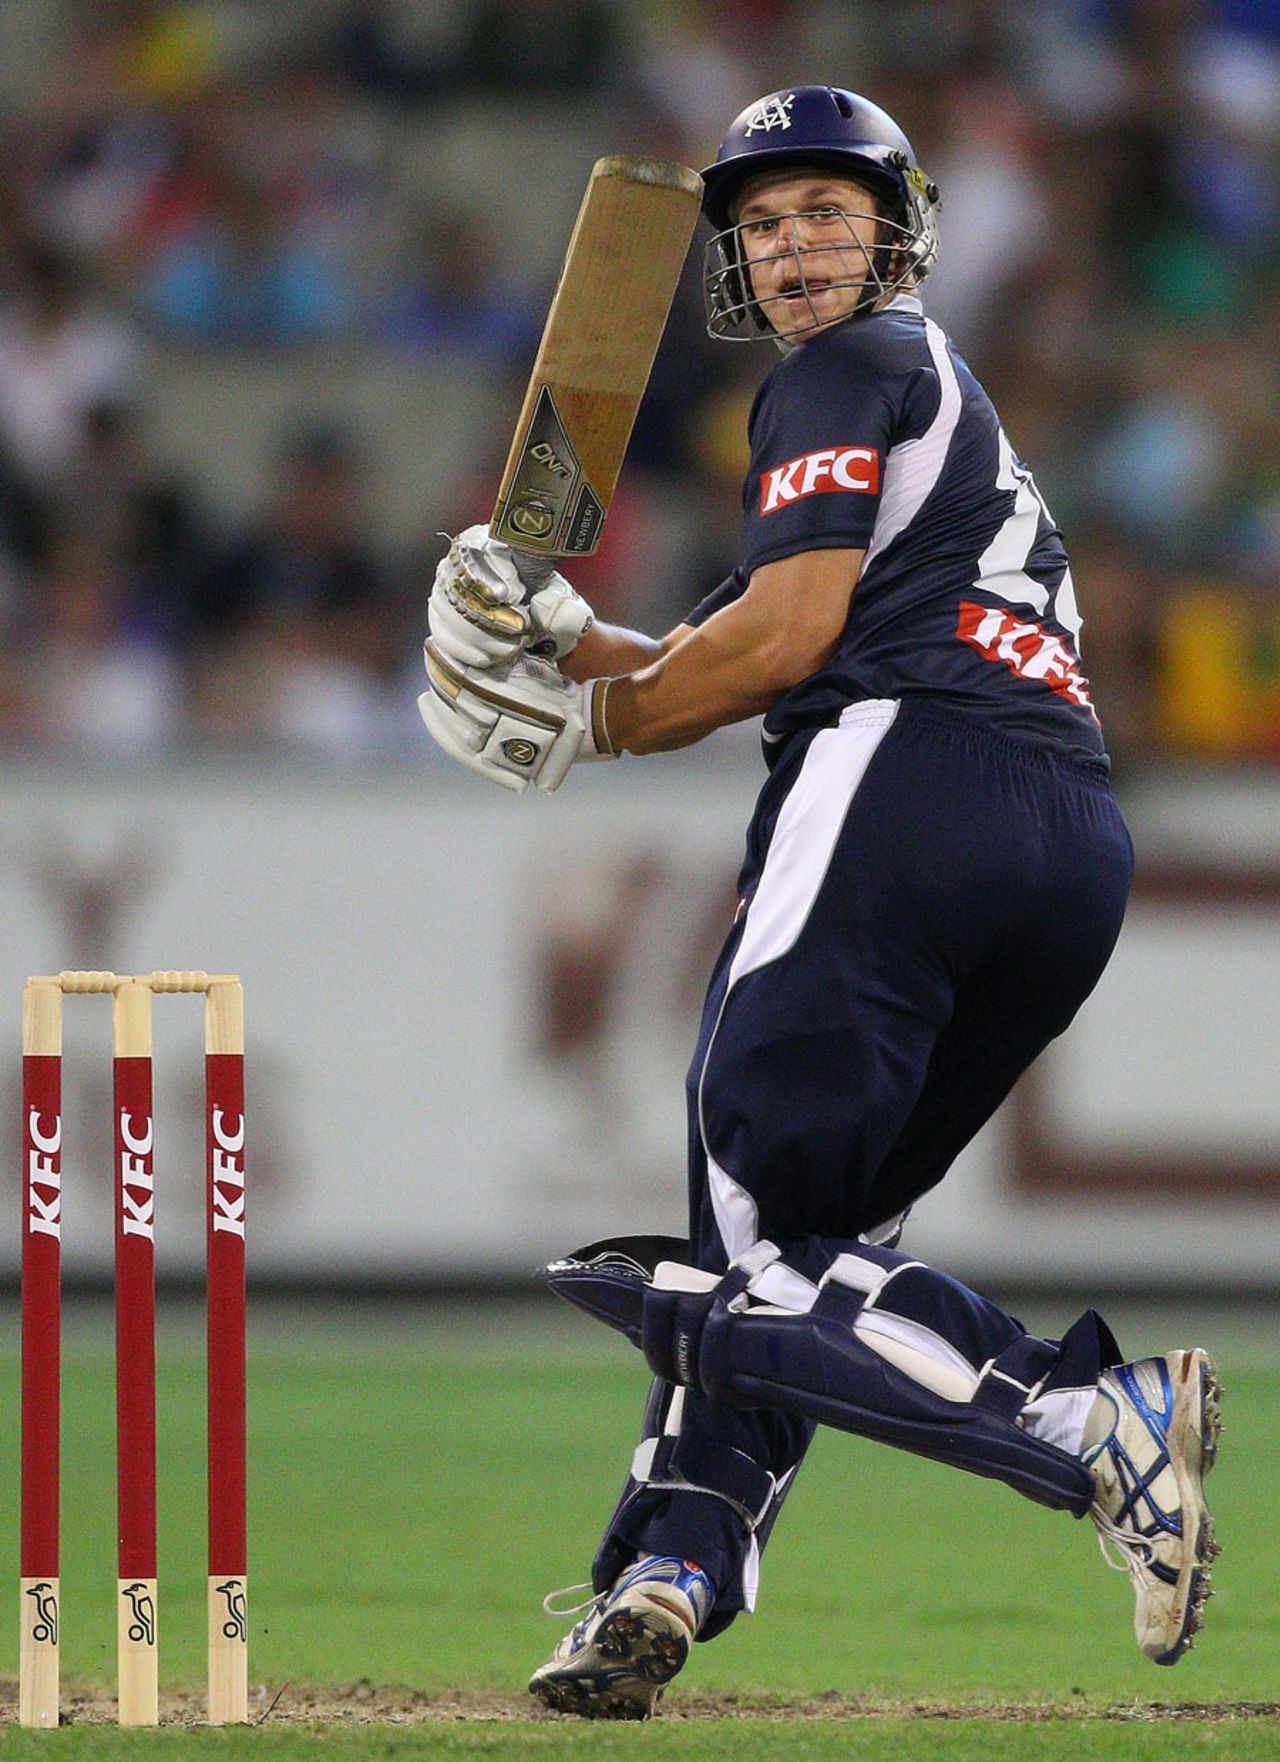 Evan Gulbis whips the ball around the corner, Victoria v New South Wales, Big Bash, Melbourne, January 22, 2011